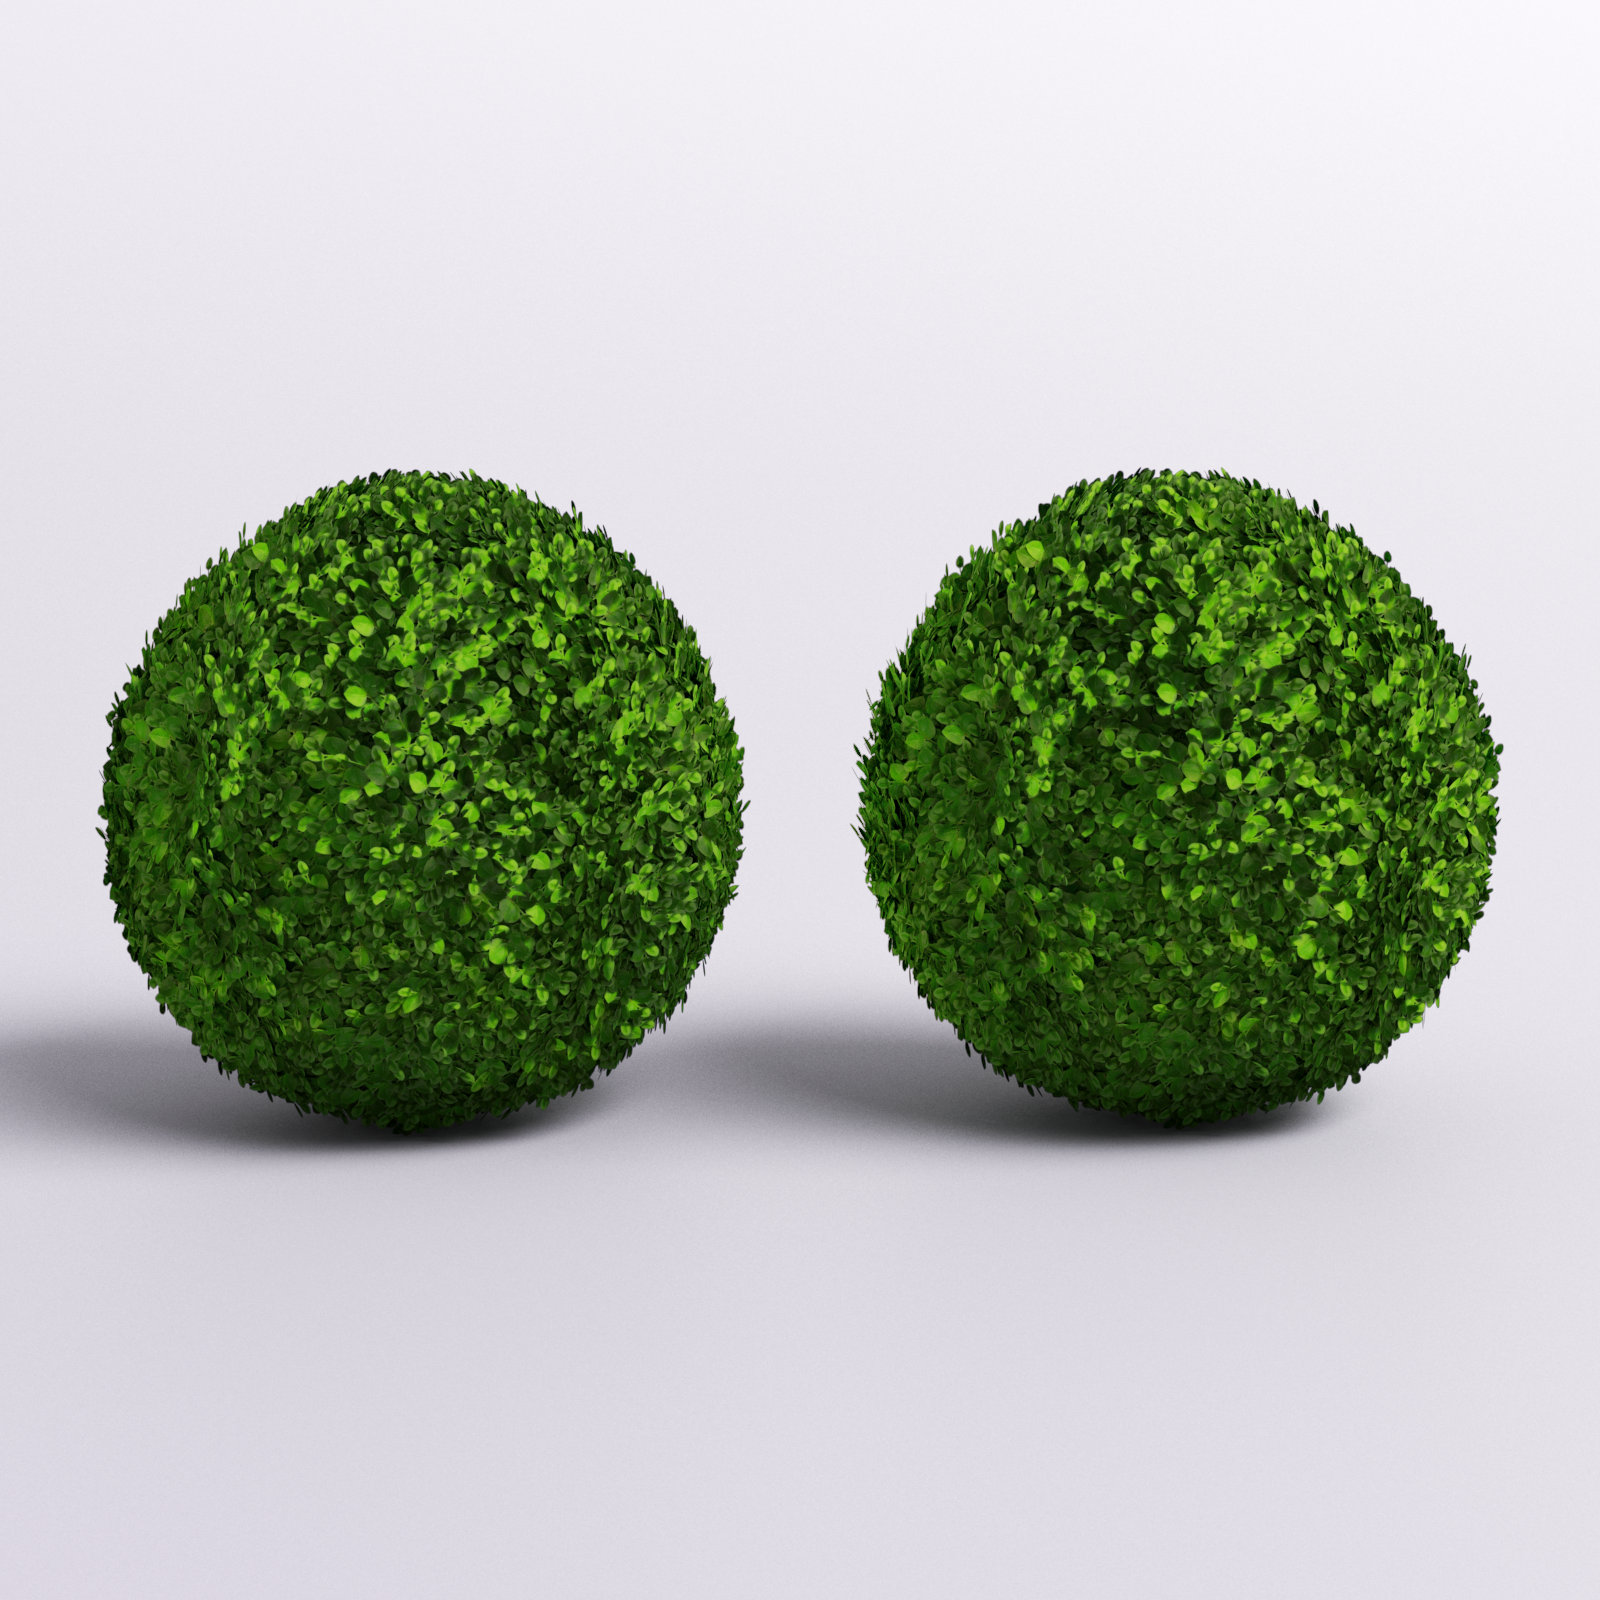 4 Pcs 14 inch Artificial Plant Topiary Balls Outdoor Round Boxwood Balls Large Garden Spheres Faux Decorative Greenery Balls